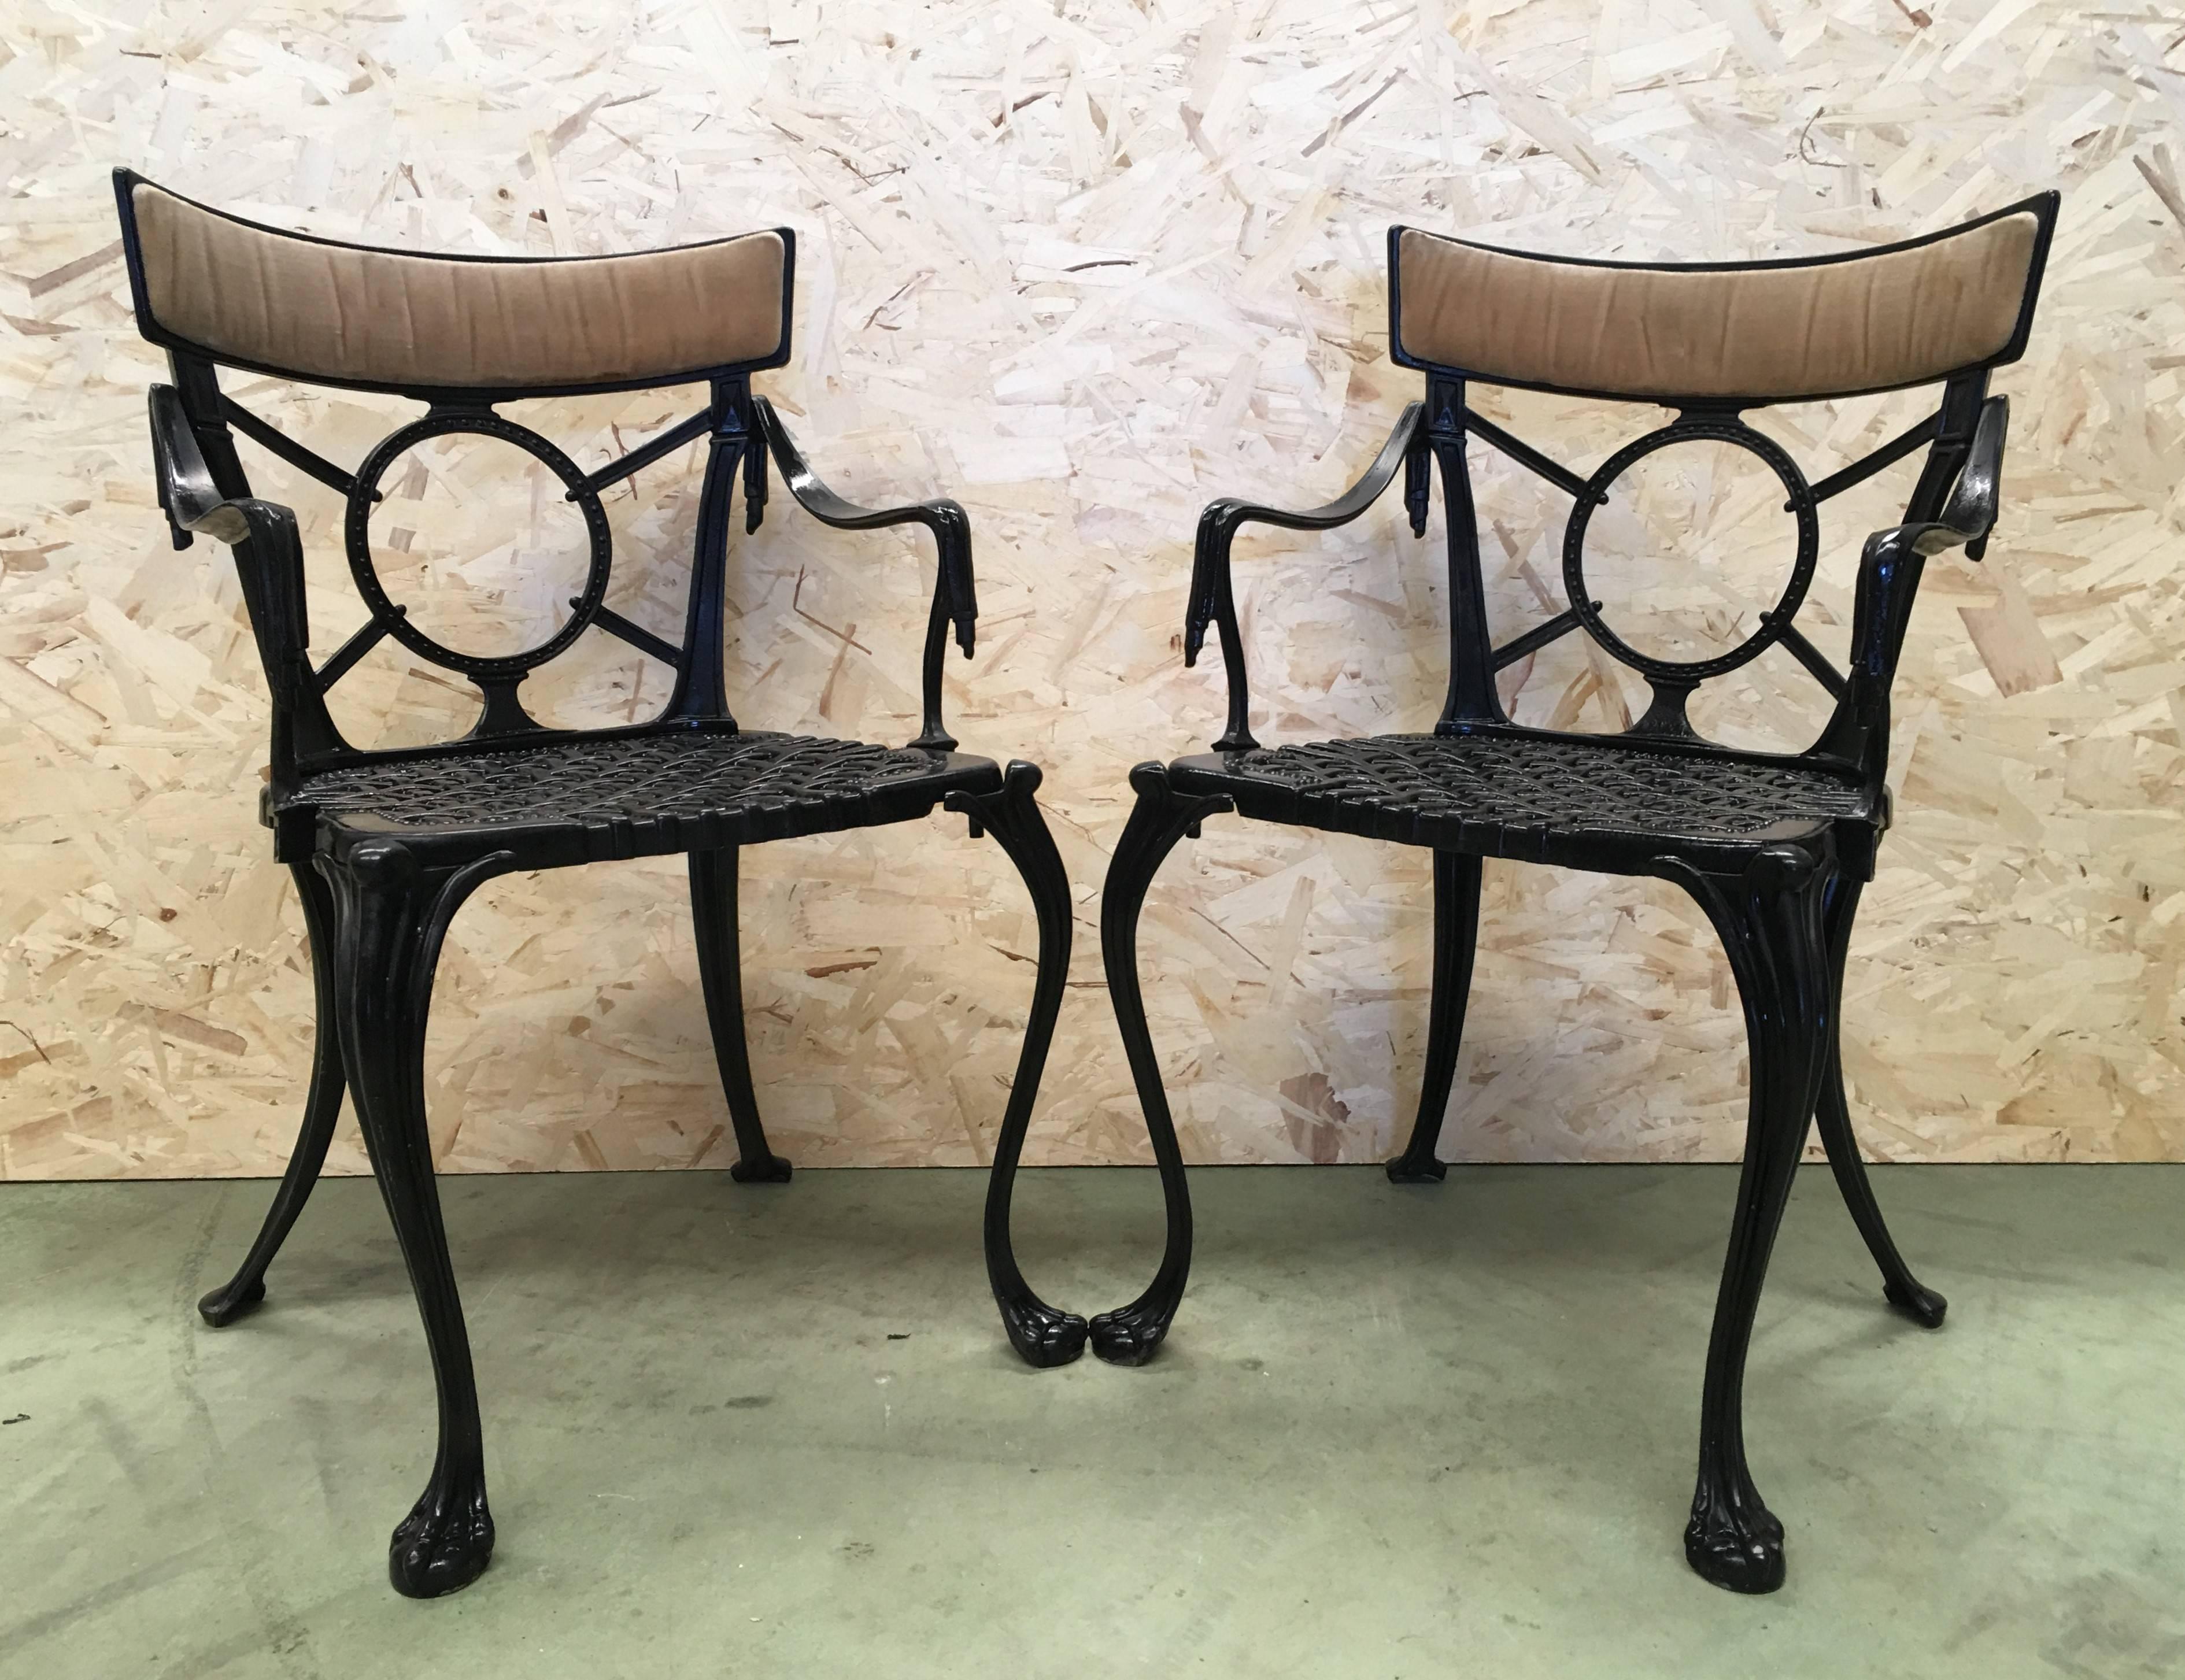 19th pair of black antique cast iron garden chairs
Black cast iron garden chairs with decorative backs.
These are very heavy, both chairs are solid and sturdy, ready for your garden.

Indoor & Outdoor